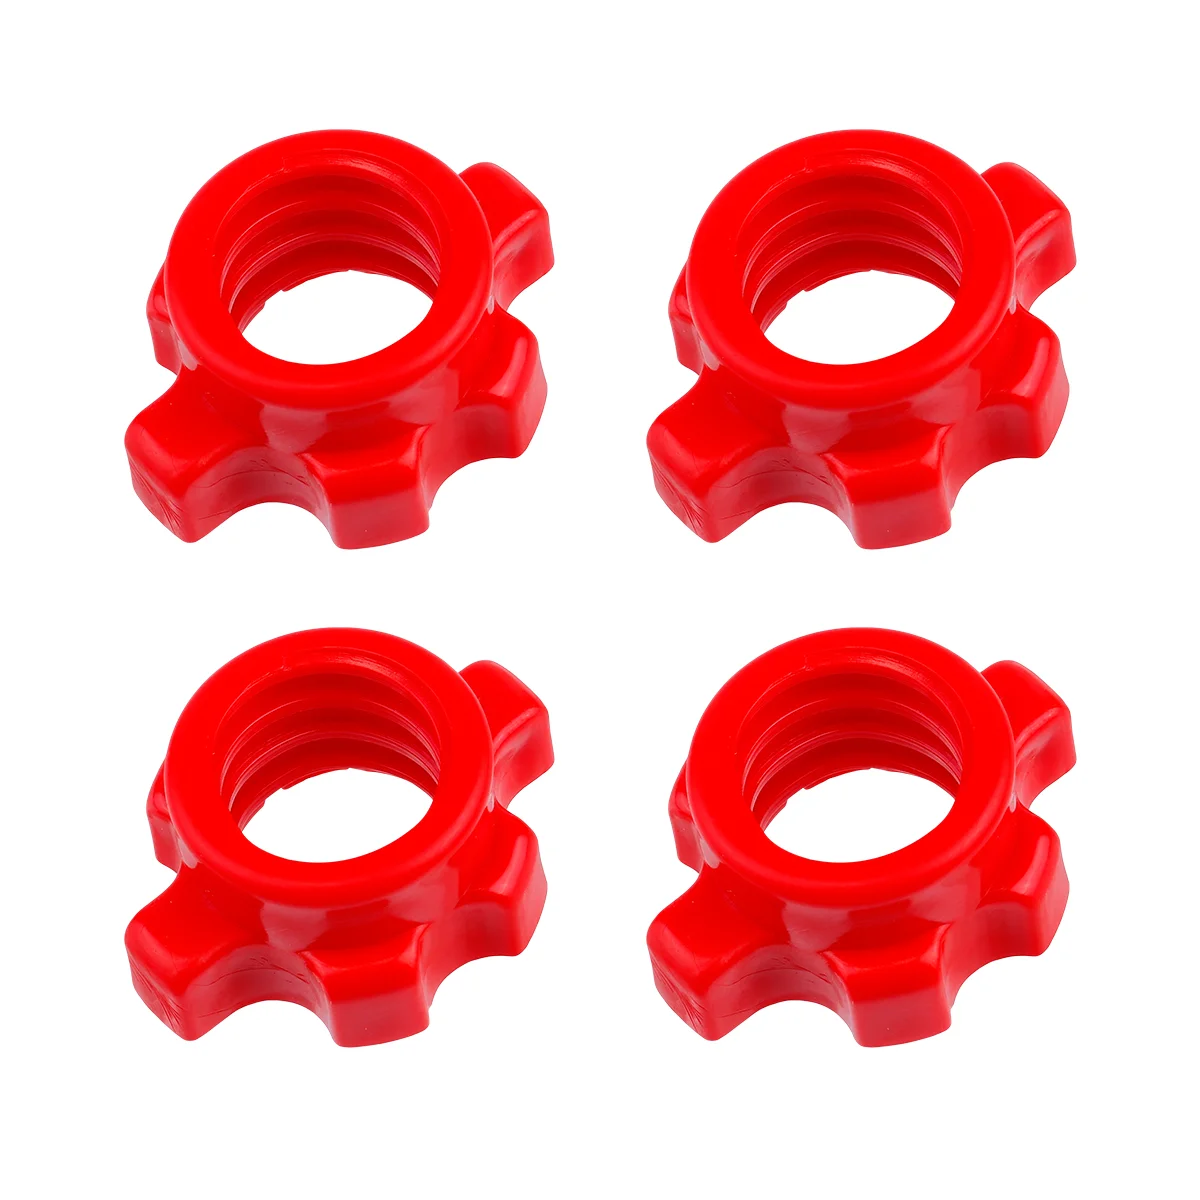 4 Pcs Dumbbell Bar Nut Barbell Fixing Accessories Home Gym Equipment Collar Exercise Handles Plate Fitness Supplies